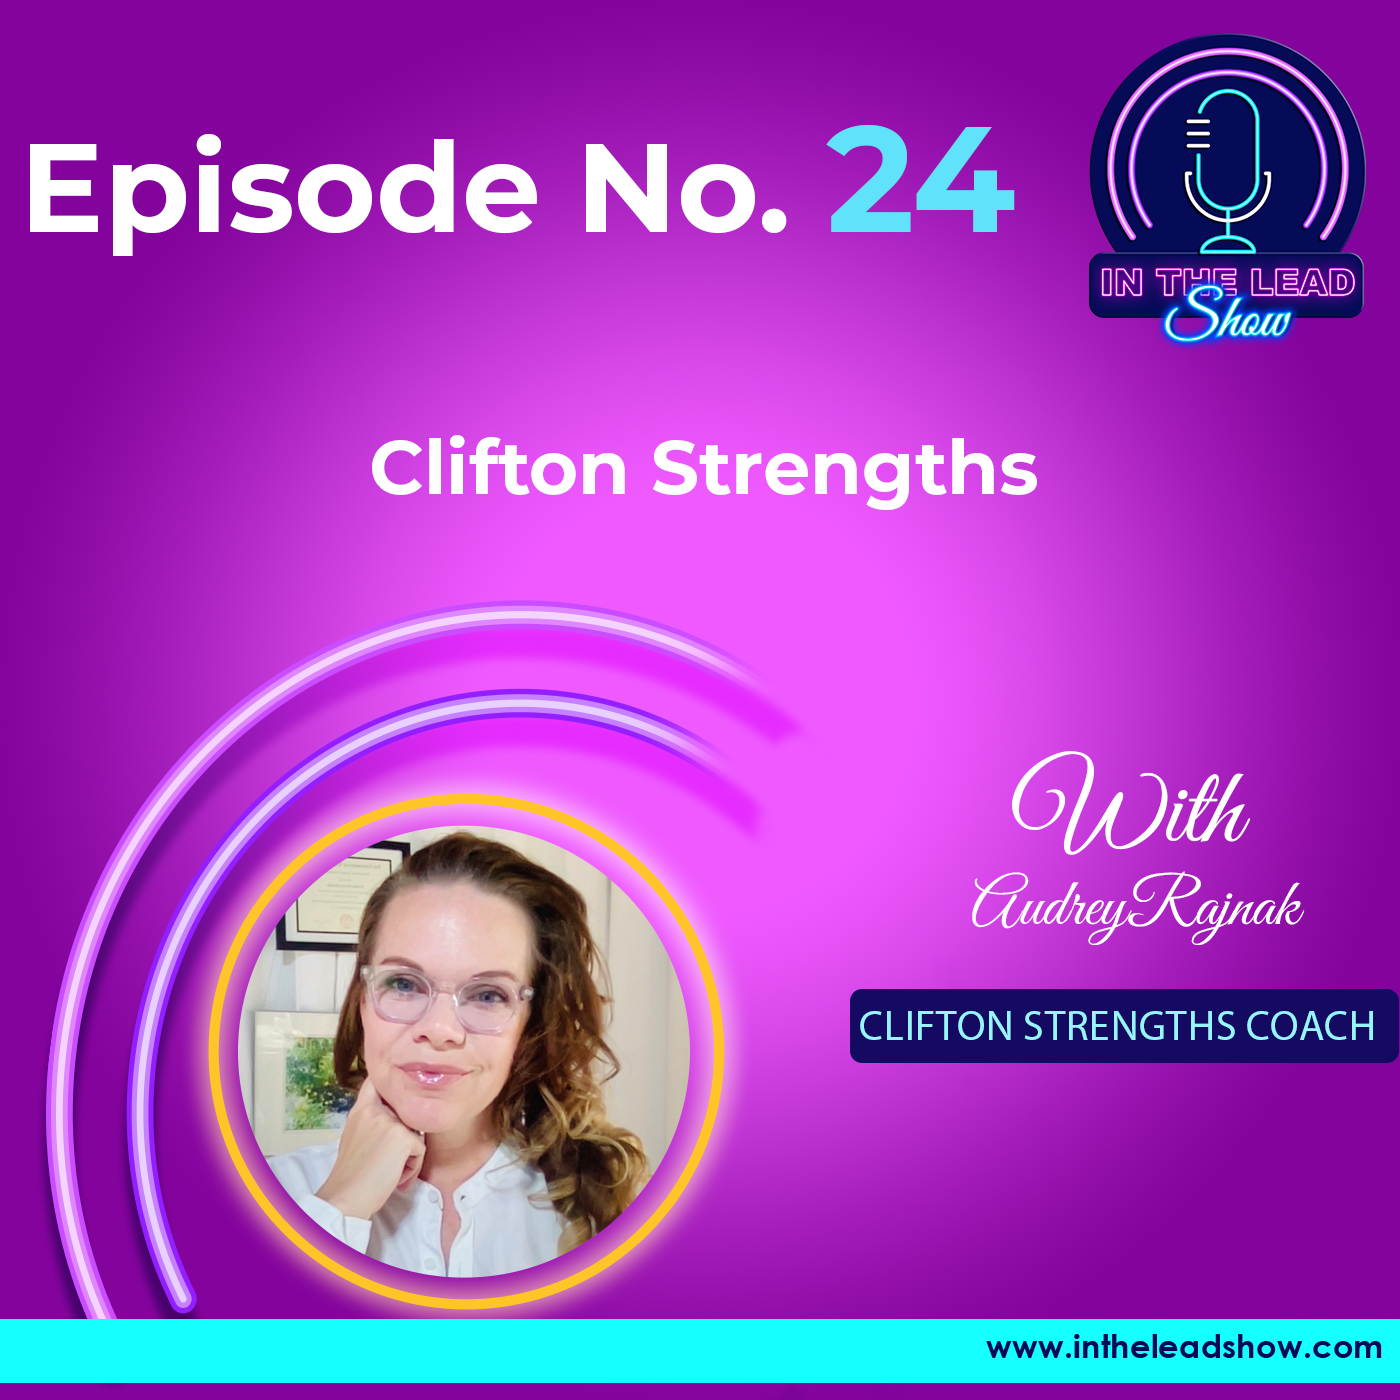 Understanding Your Strengths with the Clifton Strengths